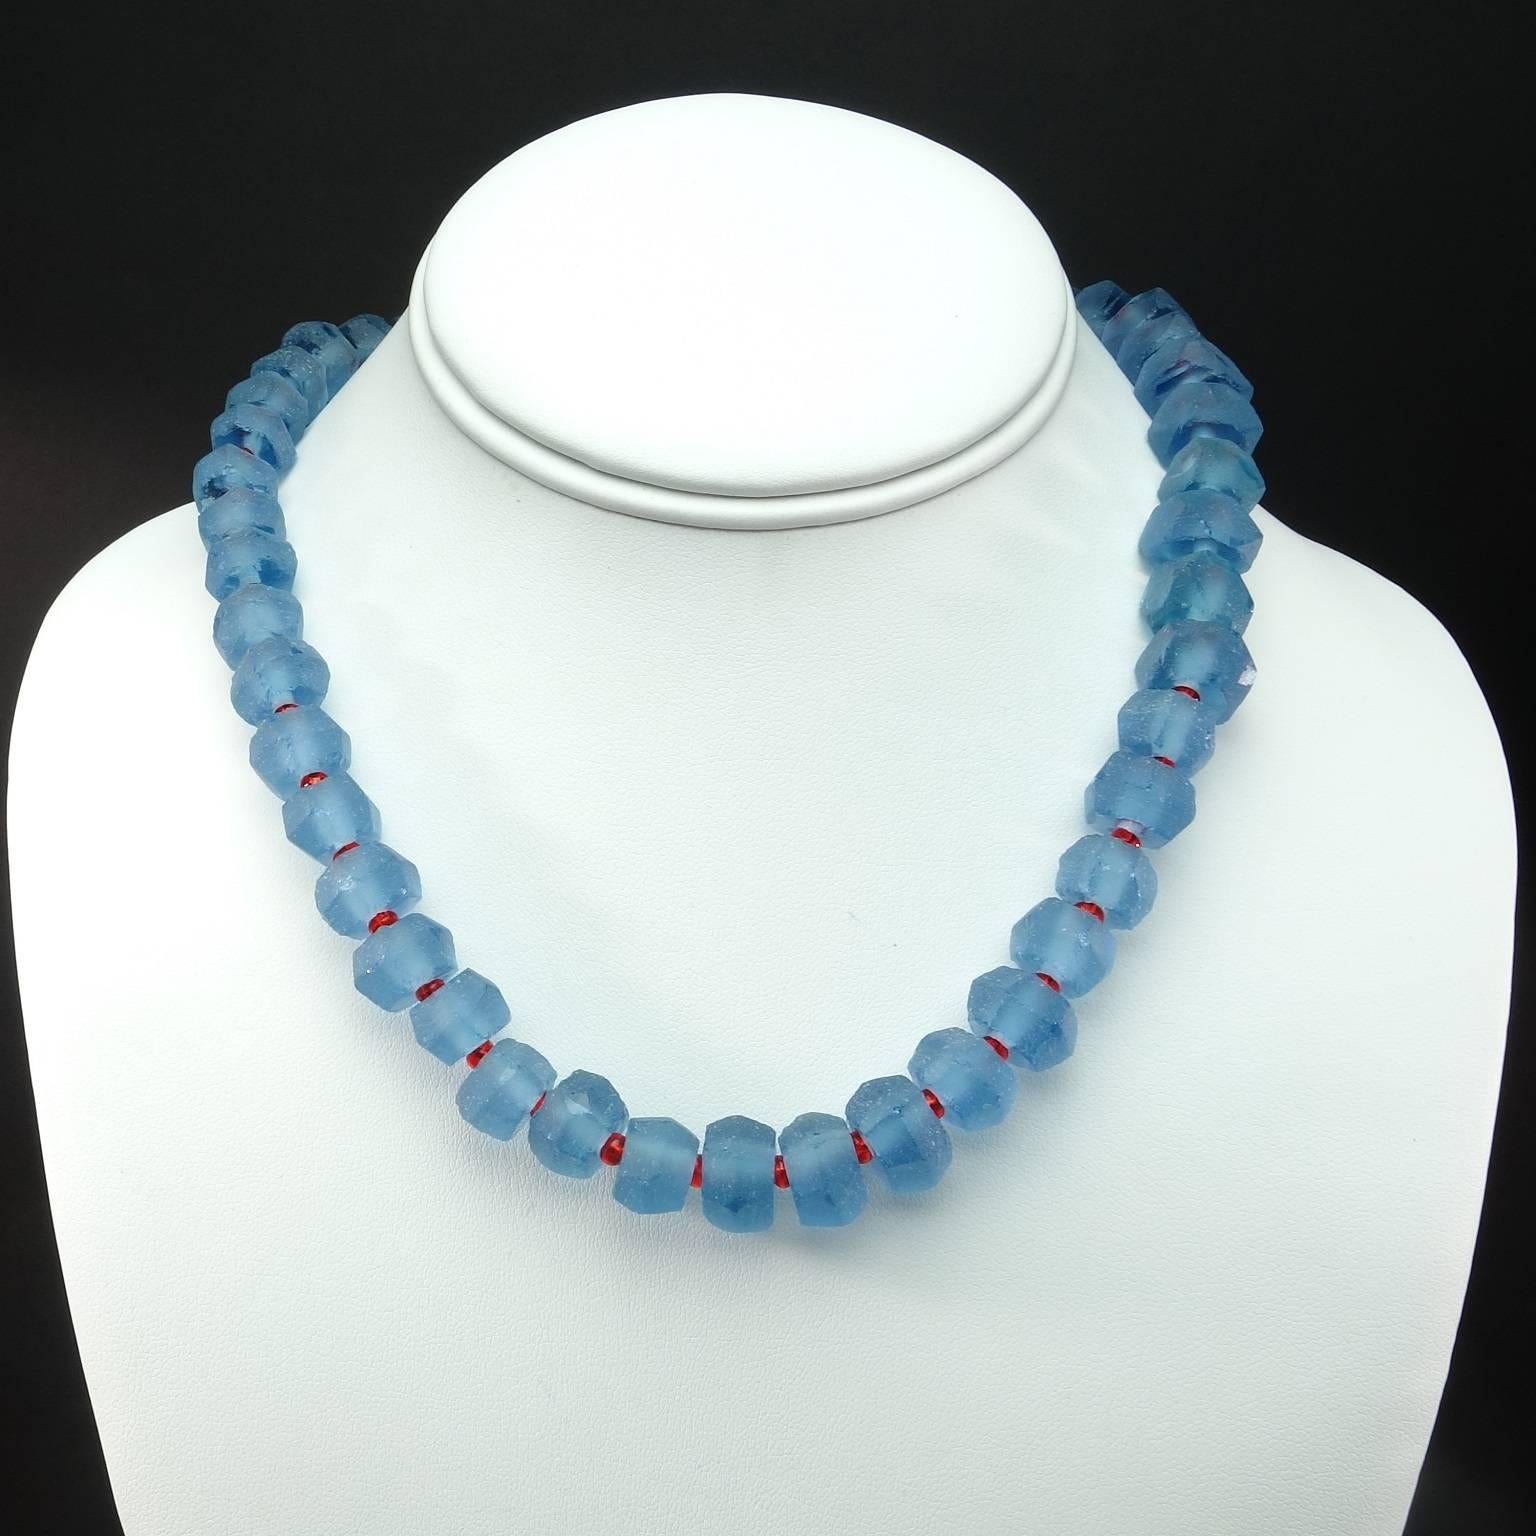 Blue Sea Glass Necklace with red sparkle spacer accents 3